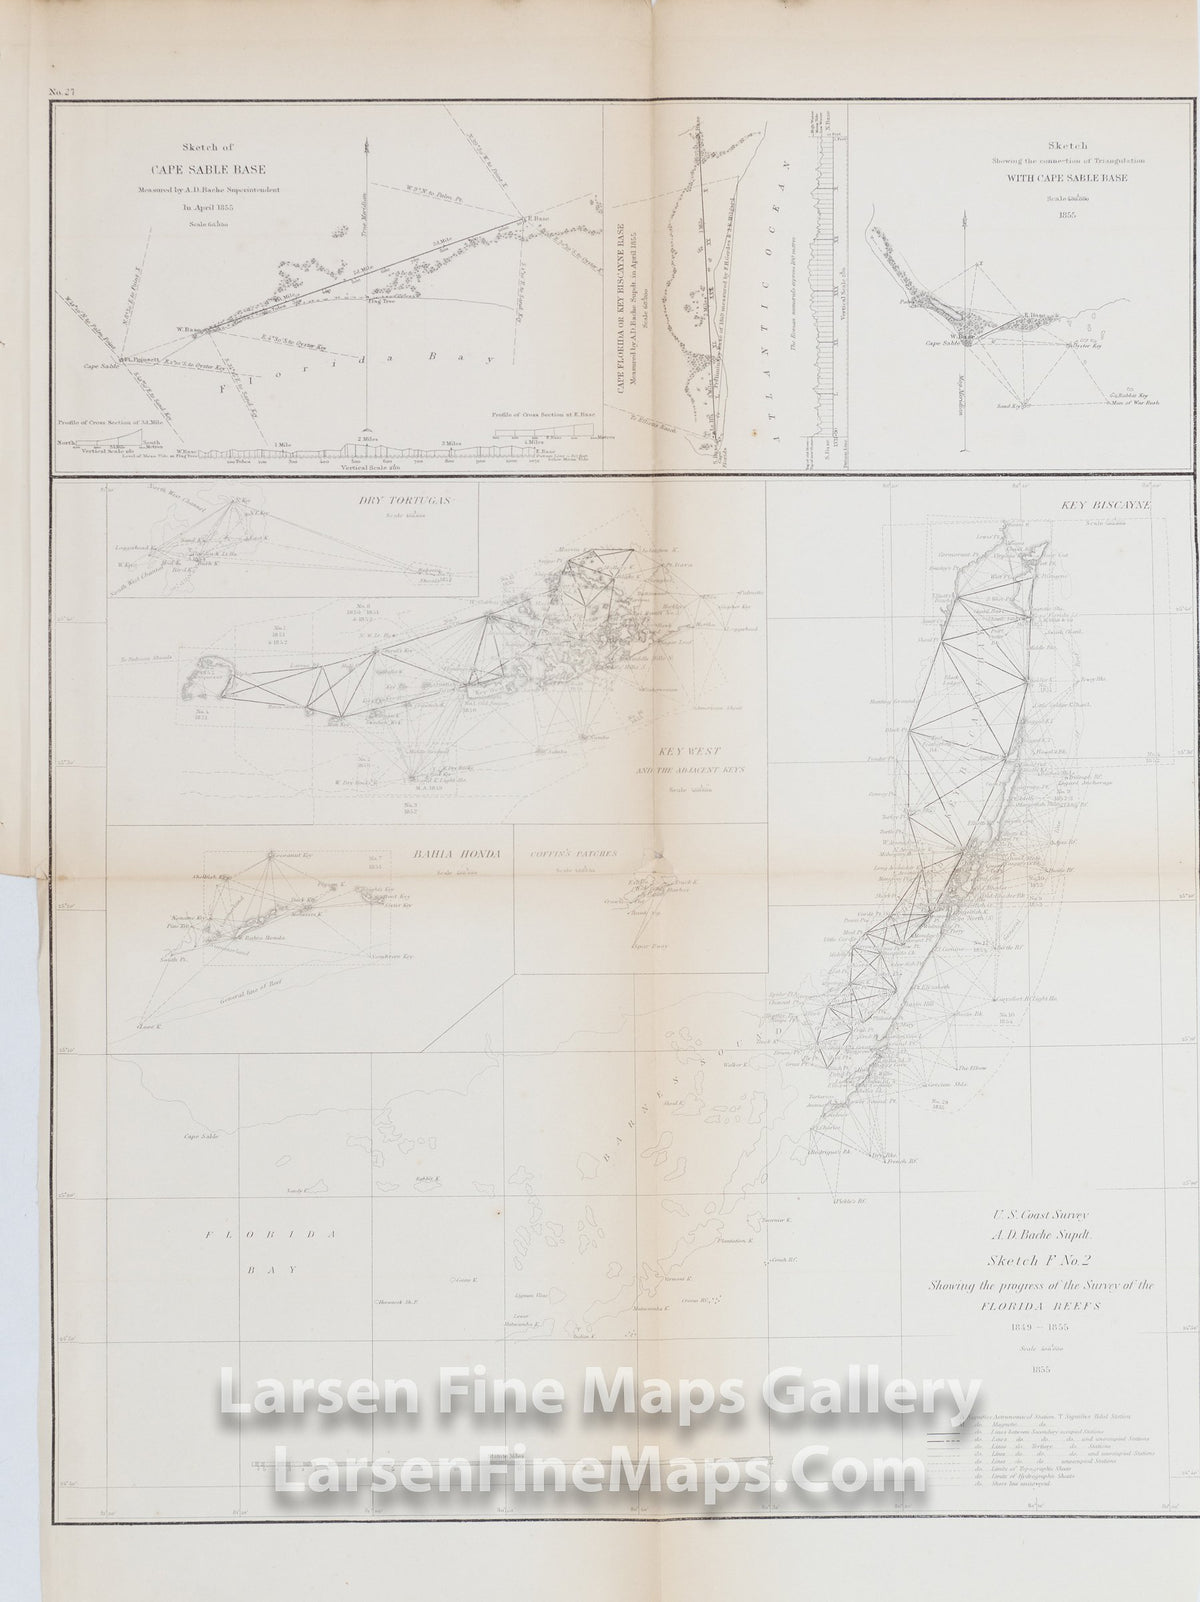 Sketch F No. 2 Showing the progress of the Survey of the Florida Reefs 1849 - 1855